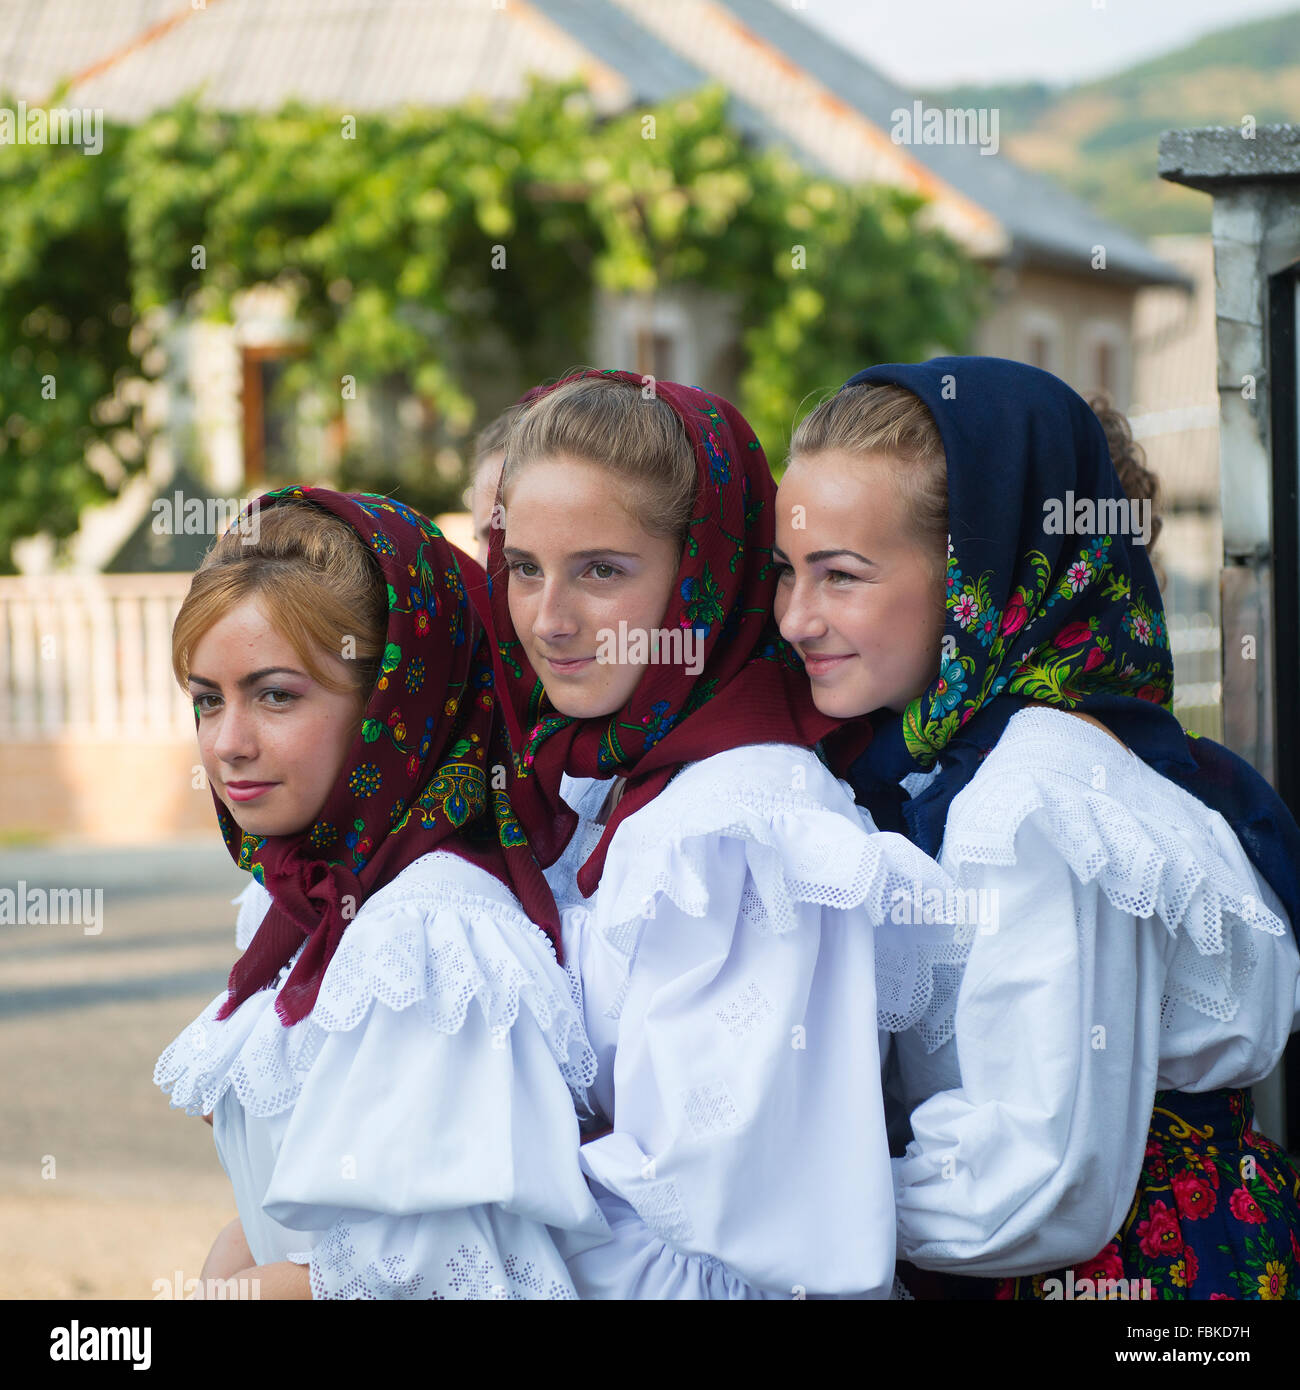 young girls in traditional costume of the district of Maramures, Romania Stock Photo